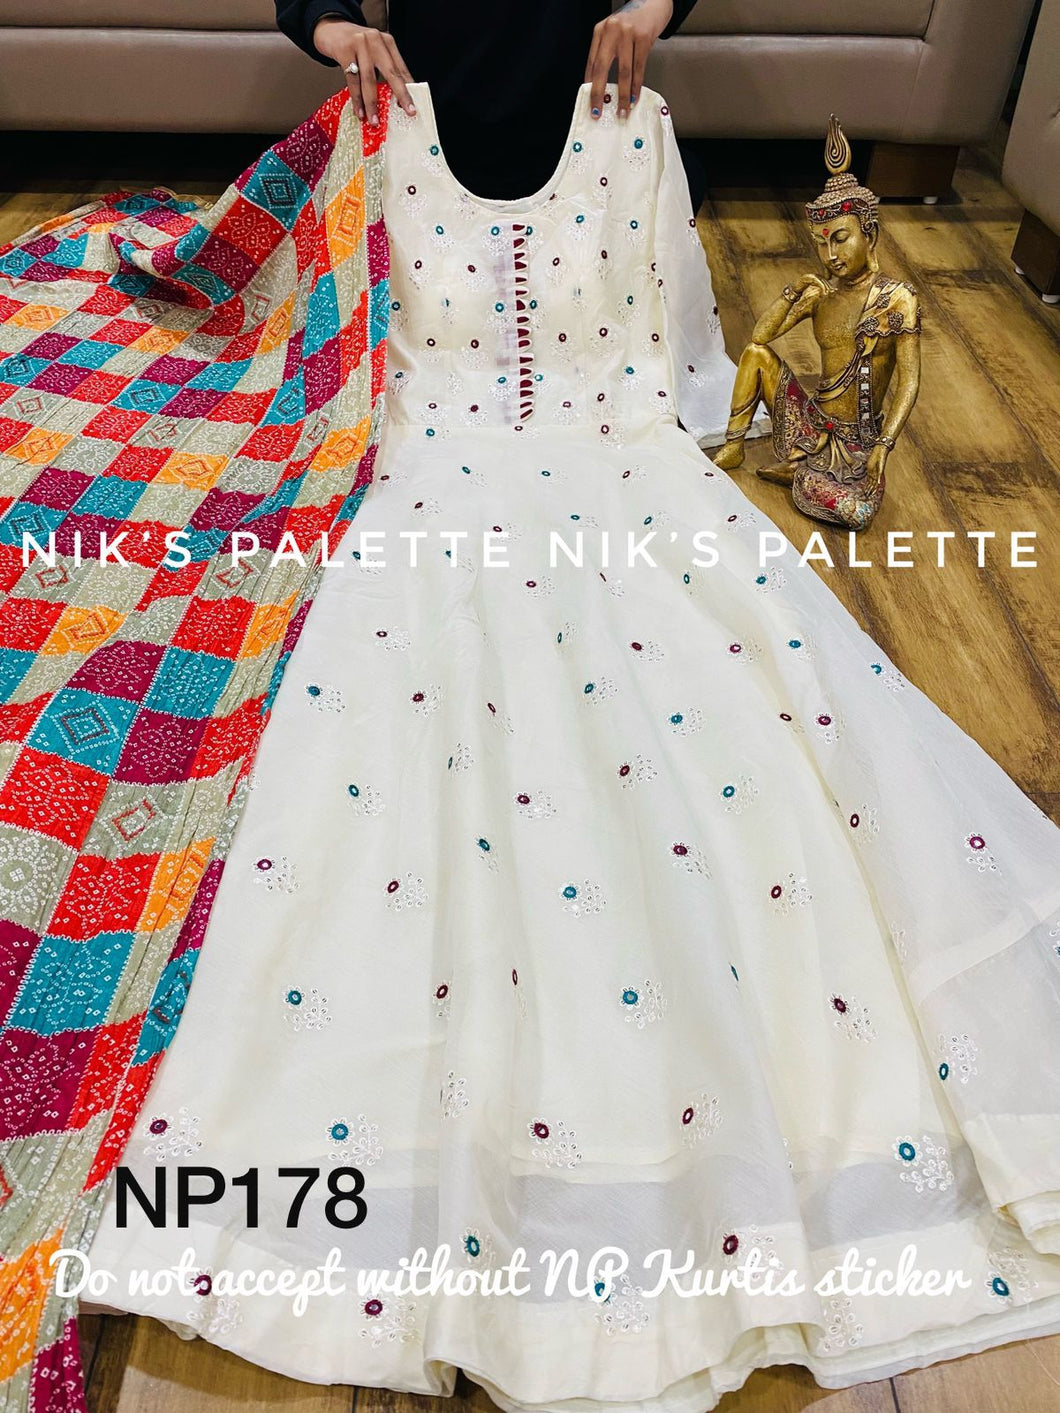 Restocked - Niks collection: mirror and bandhani